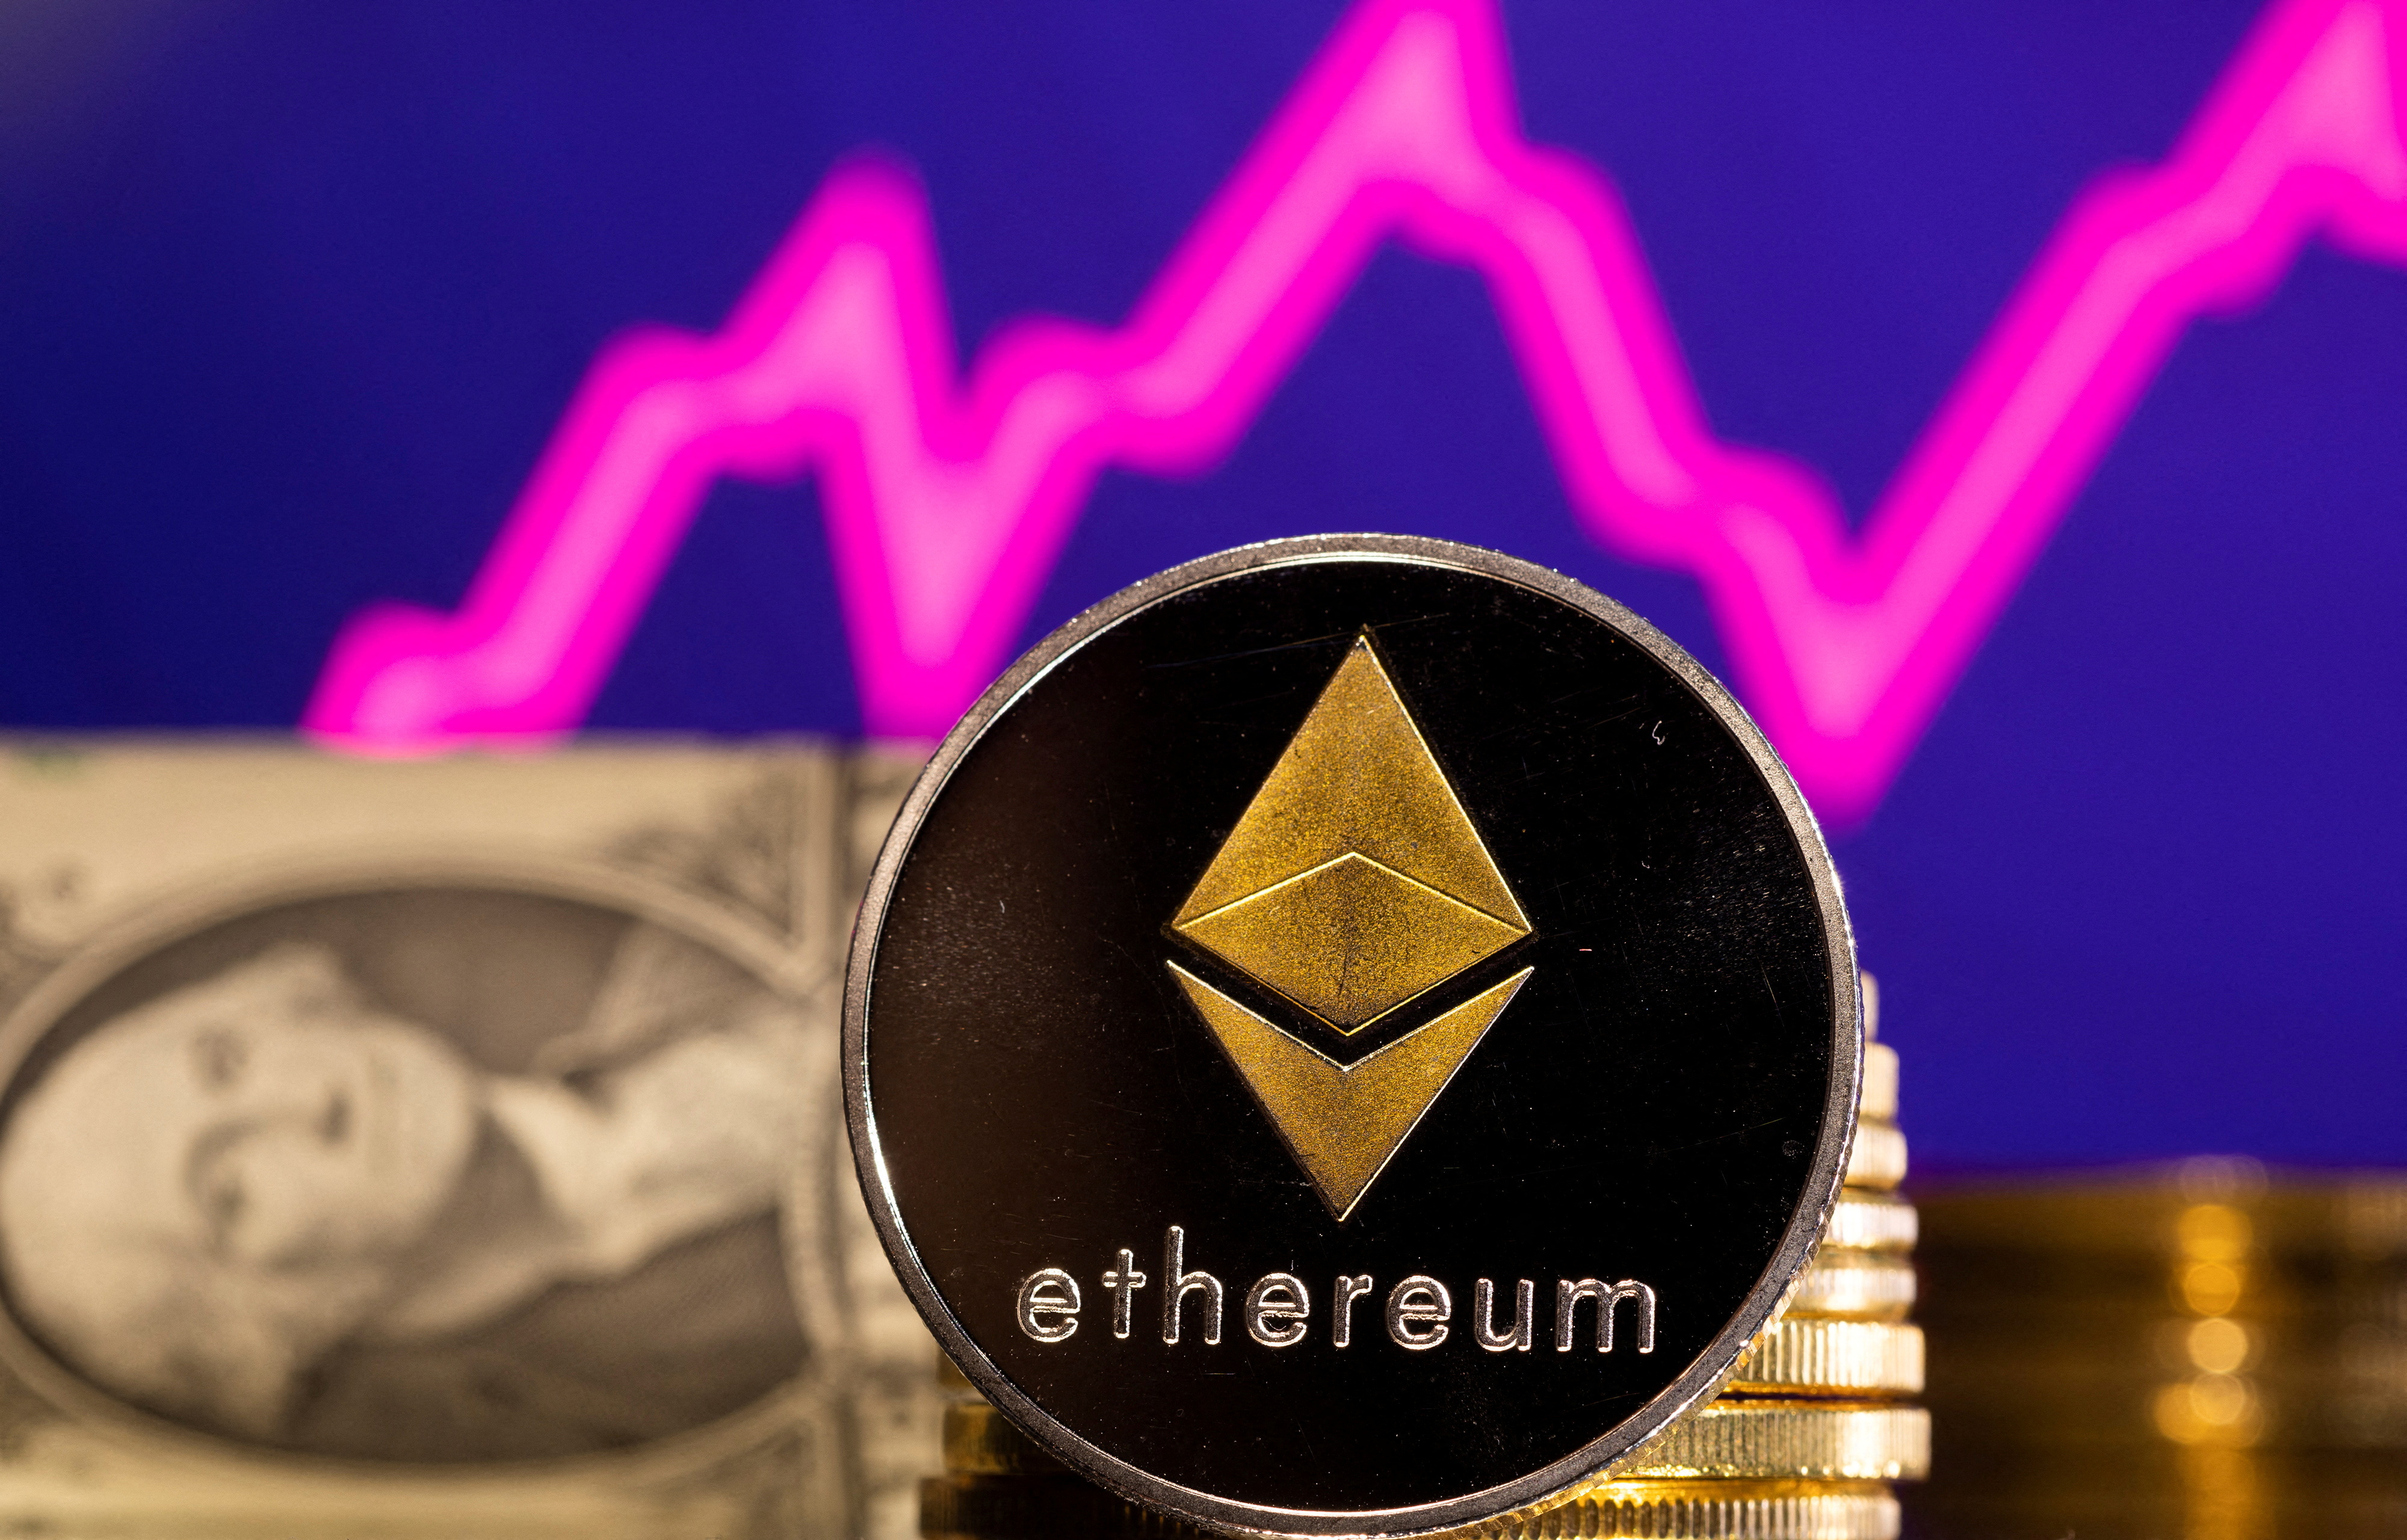 Top Cryptocurrency: Top cryptocurrencies to invest in - The Economic Times